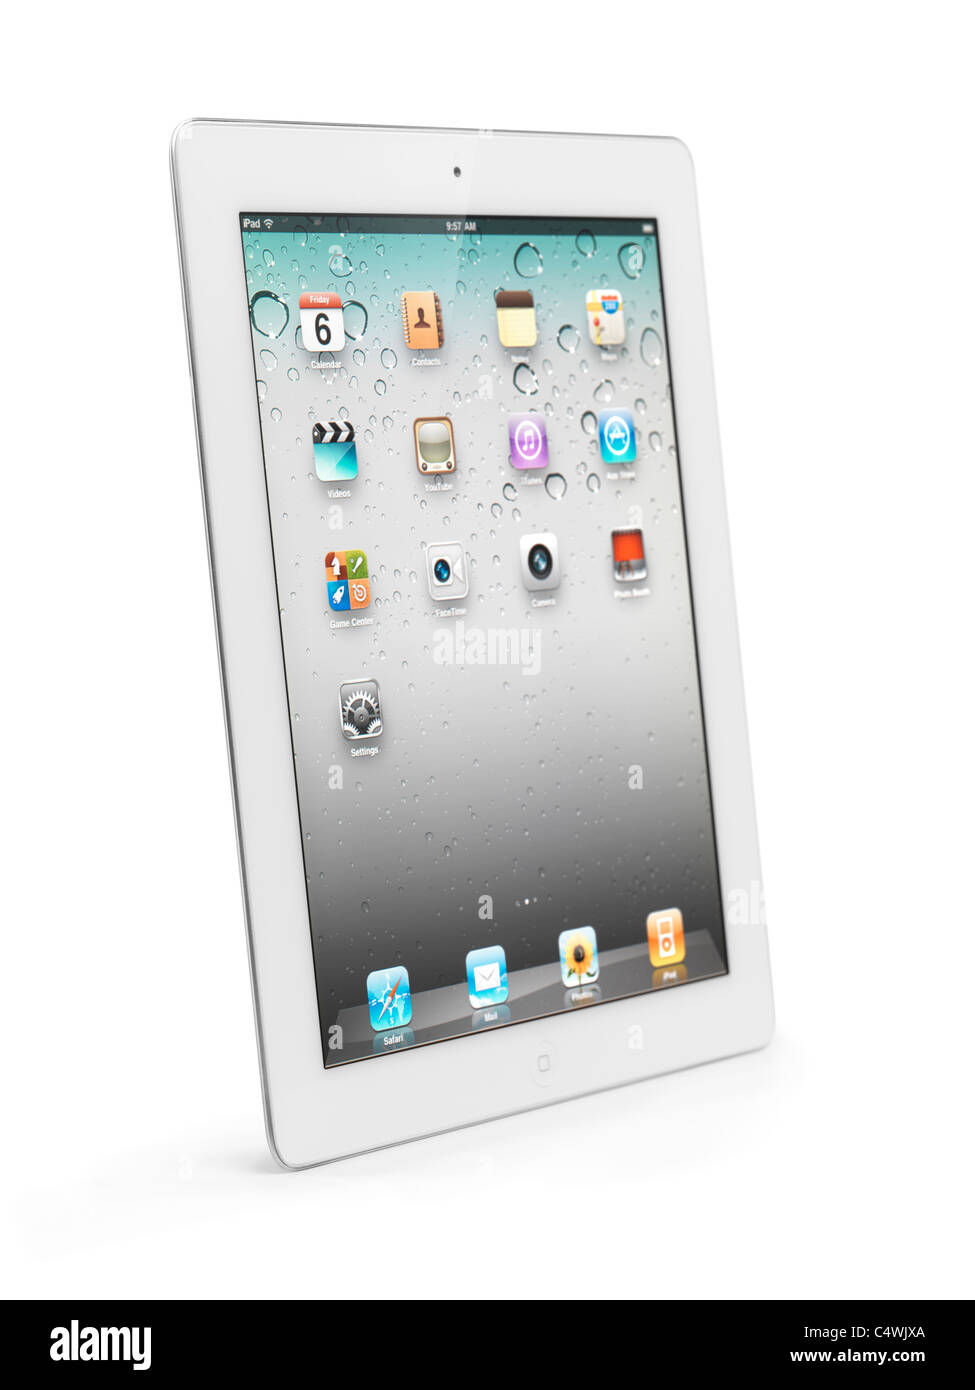 White Apple iPad 2 tablet computer with desktop icons on its display. Isolated with clipping path on white background. Stock Photo